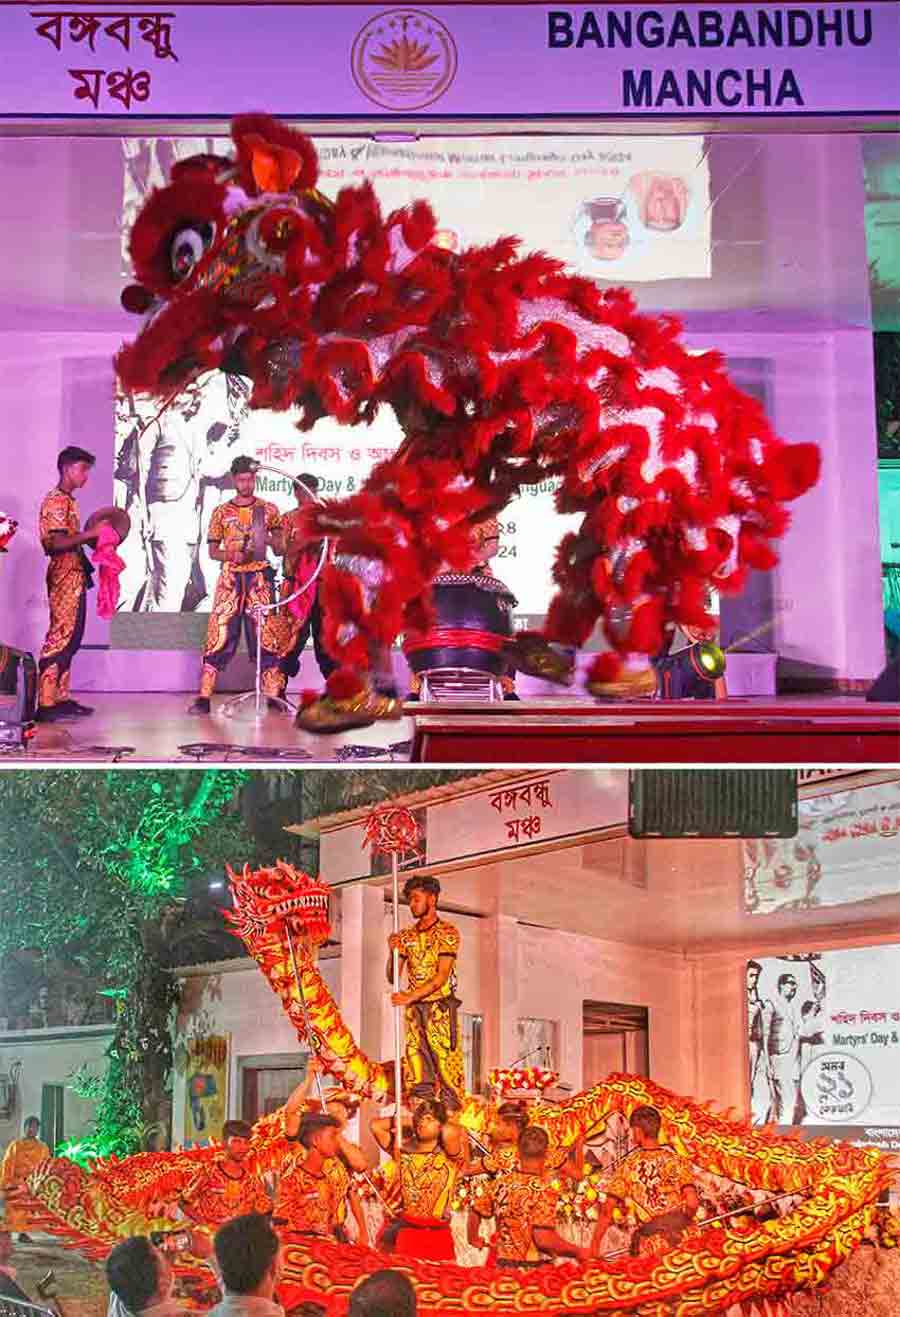 Cultural programmes were held at Bangladesh Deputy High Commission in Kolkata on the occasion of International Mother Language Day on Wednesday   